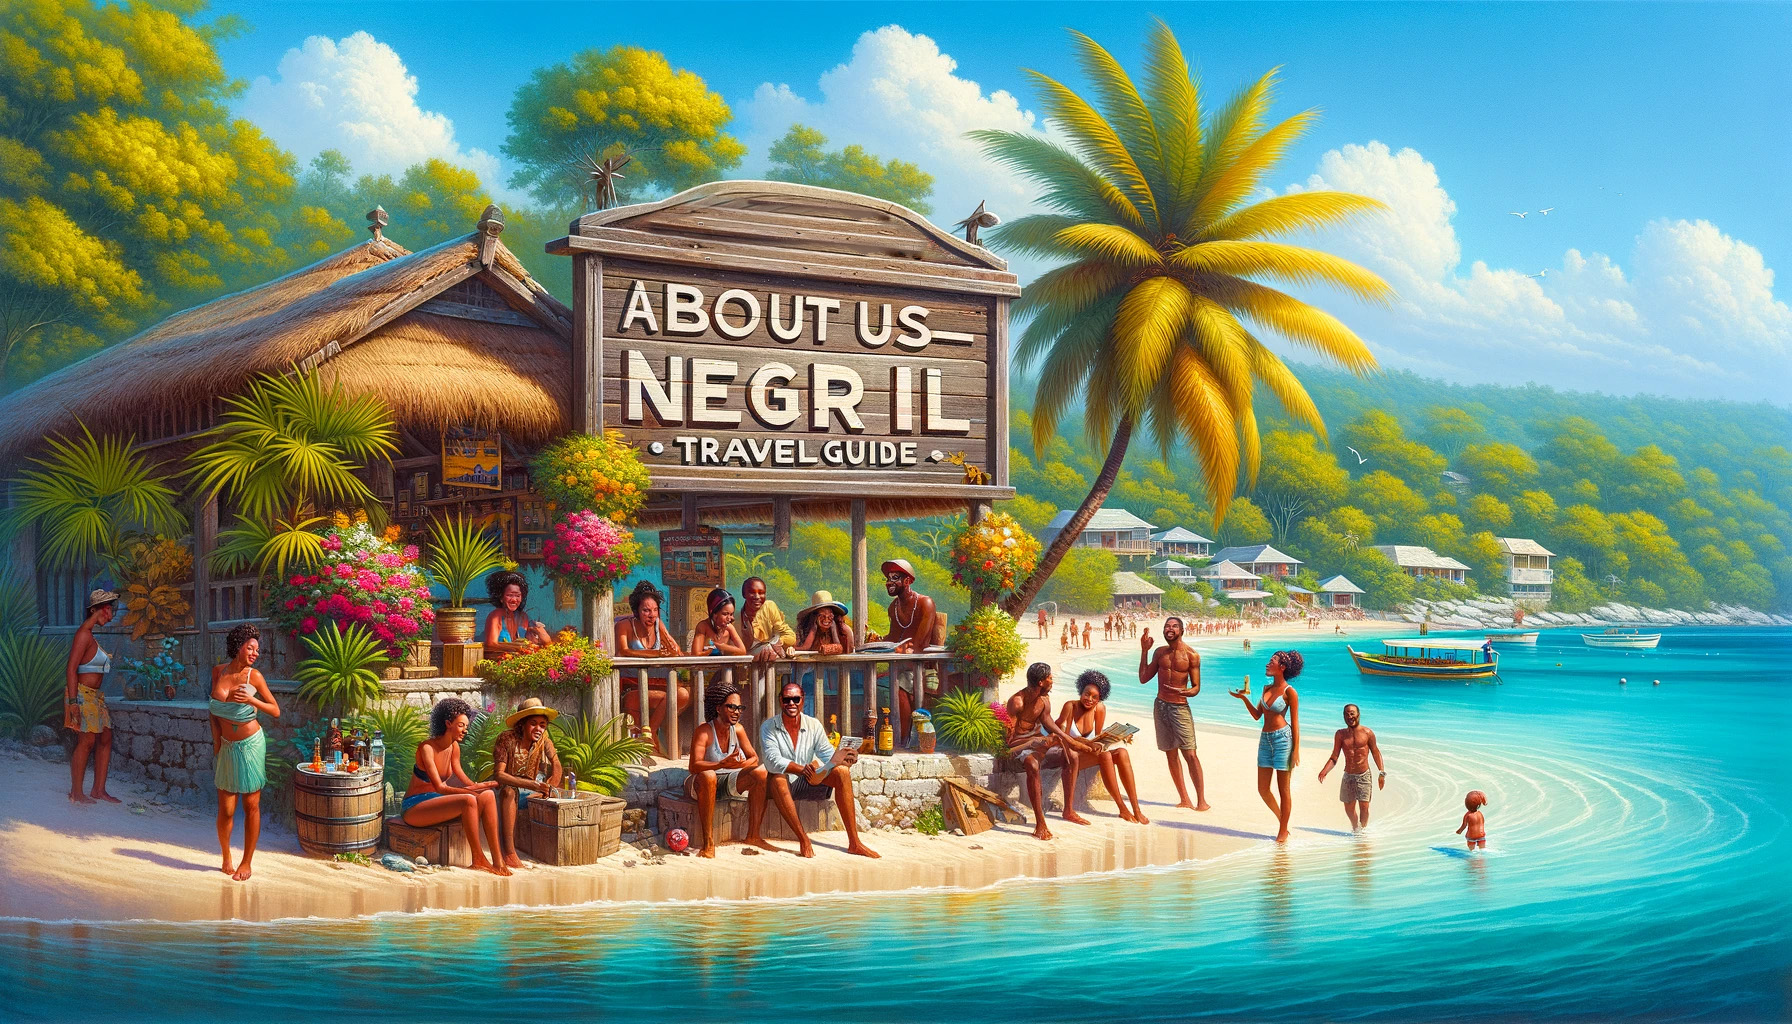 About Us - Negril Travel Guide